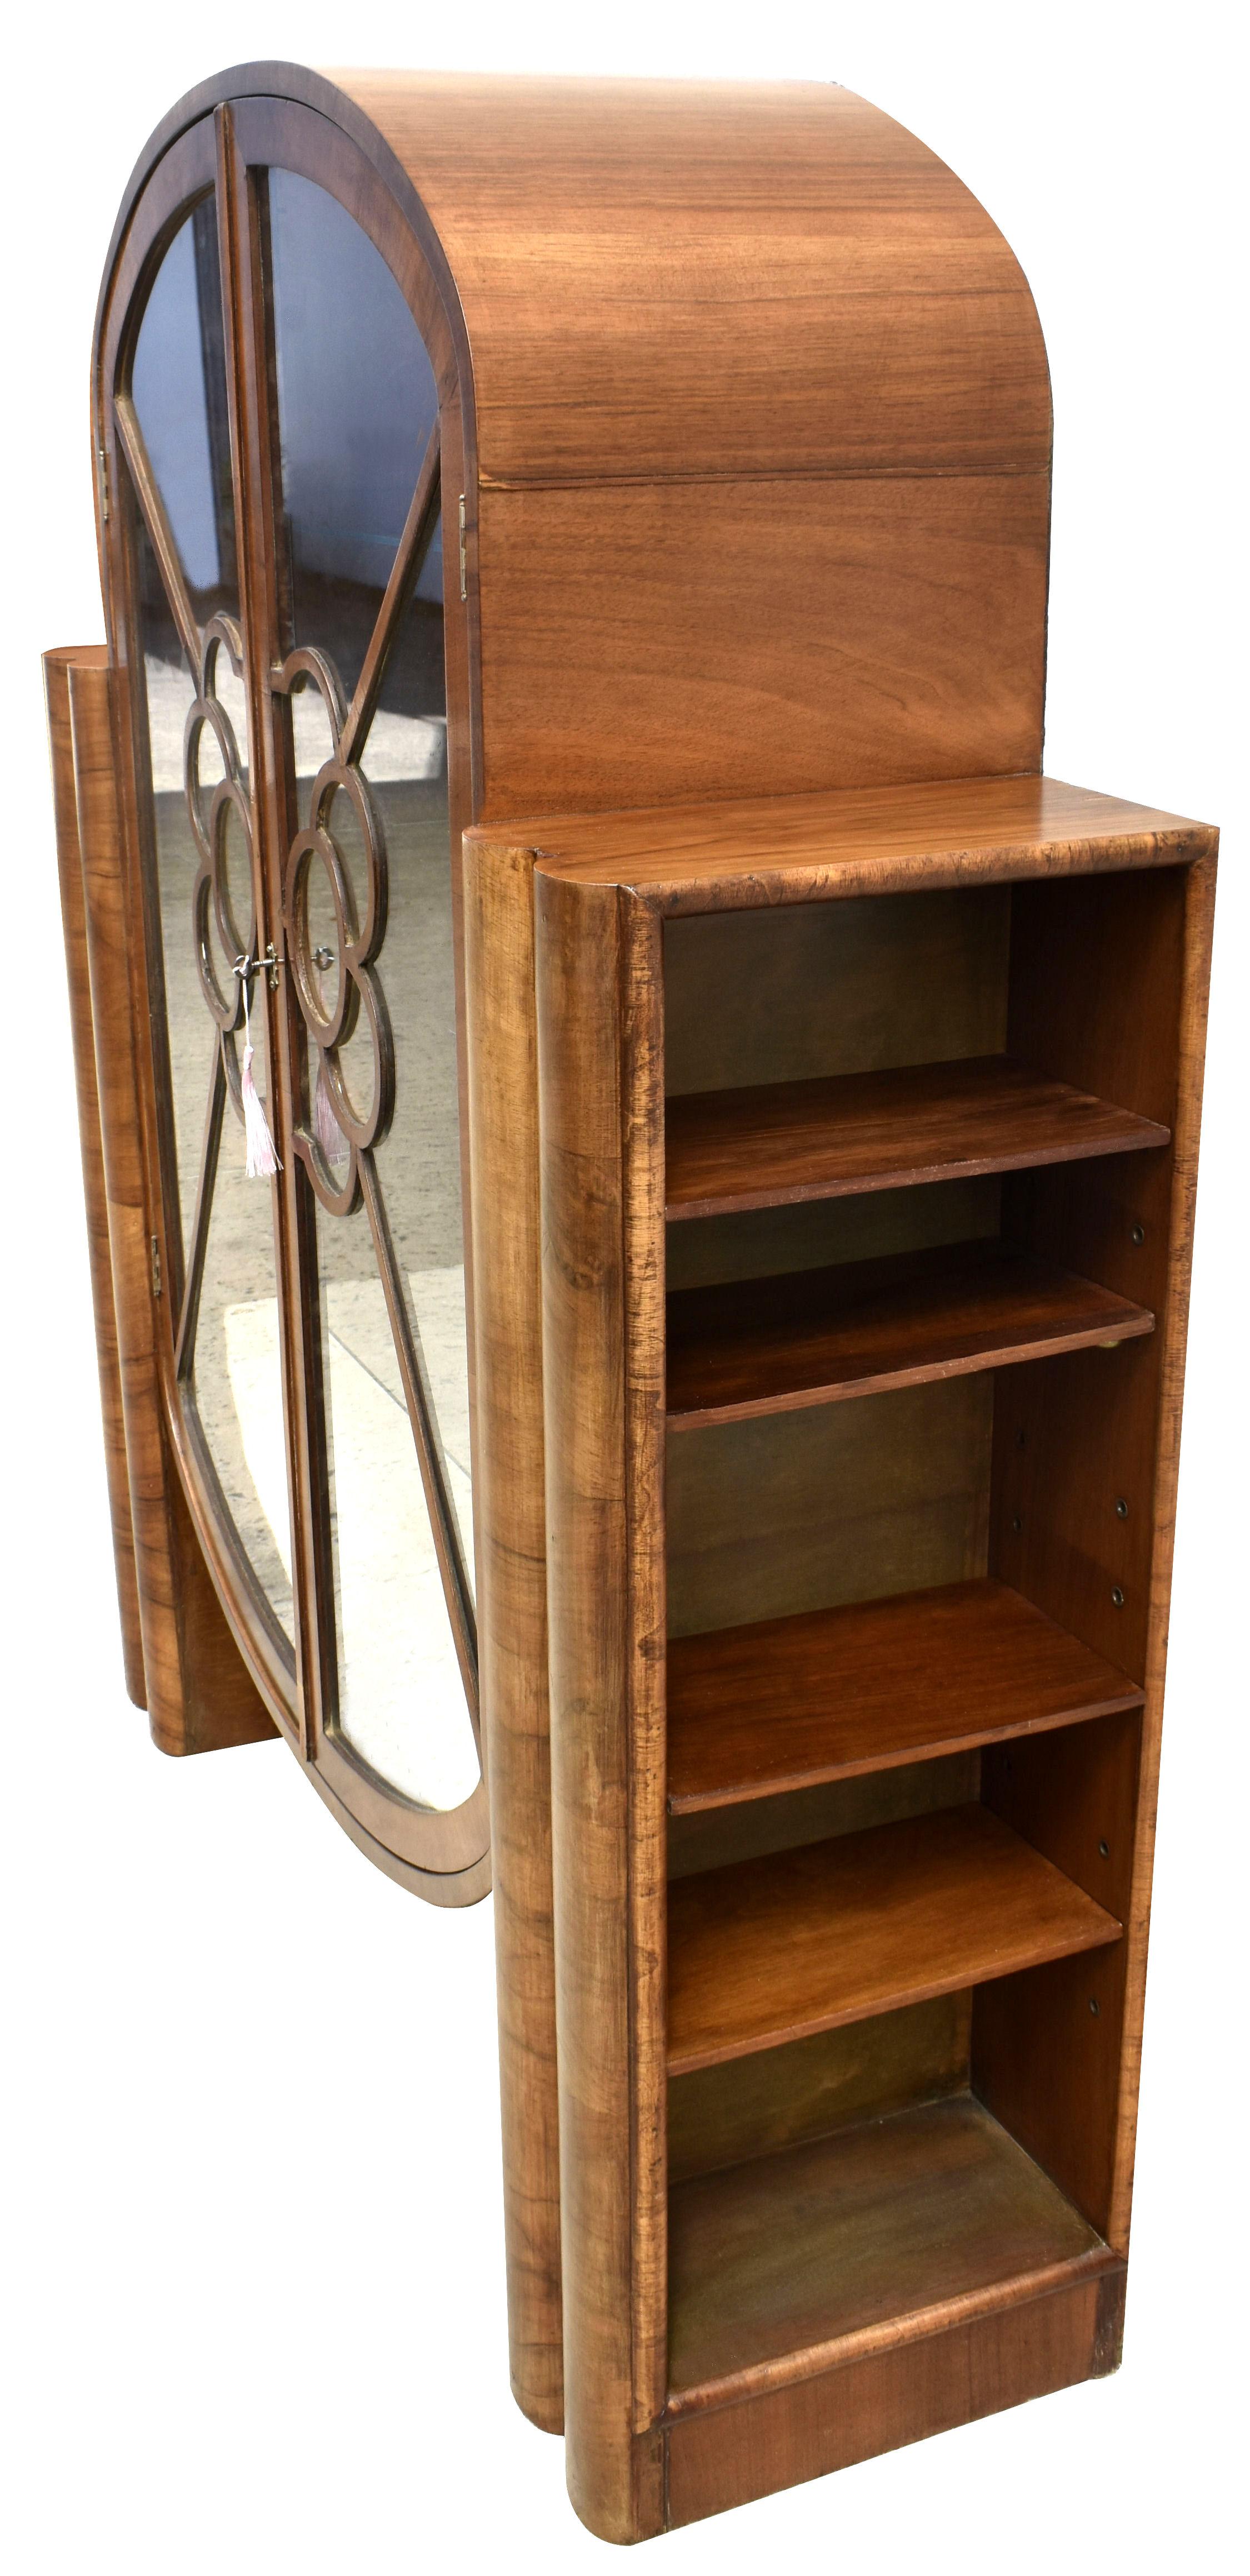 This is a fabulous opportunity to acquire a genuinely rare design Art Deco display cabinet. Dating to the 1930's this gorgeous mid-tone walnut, still with original working key and three glass shelves and usable bottom shelf. Generously spaced